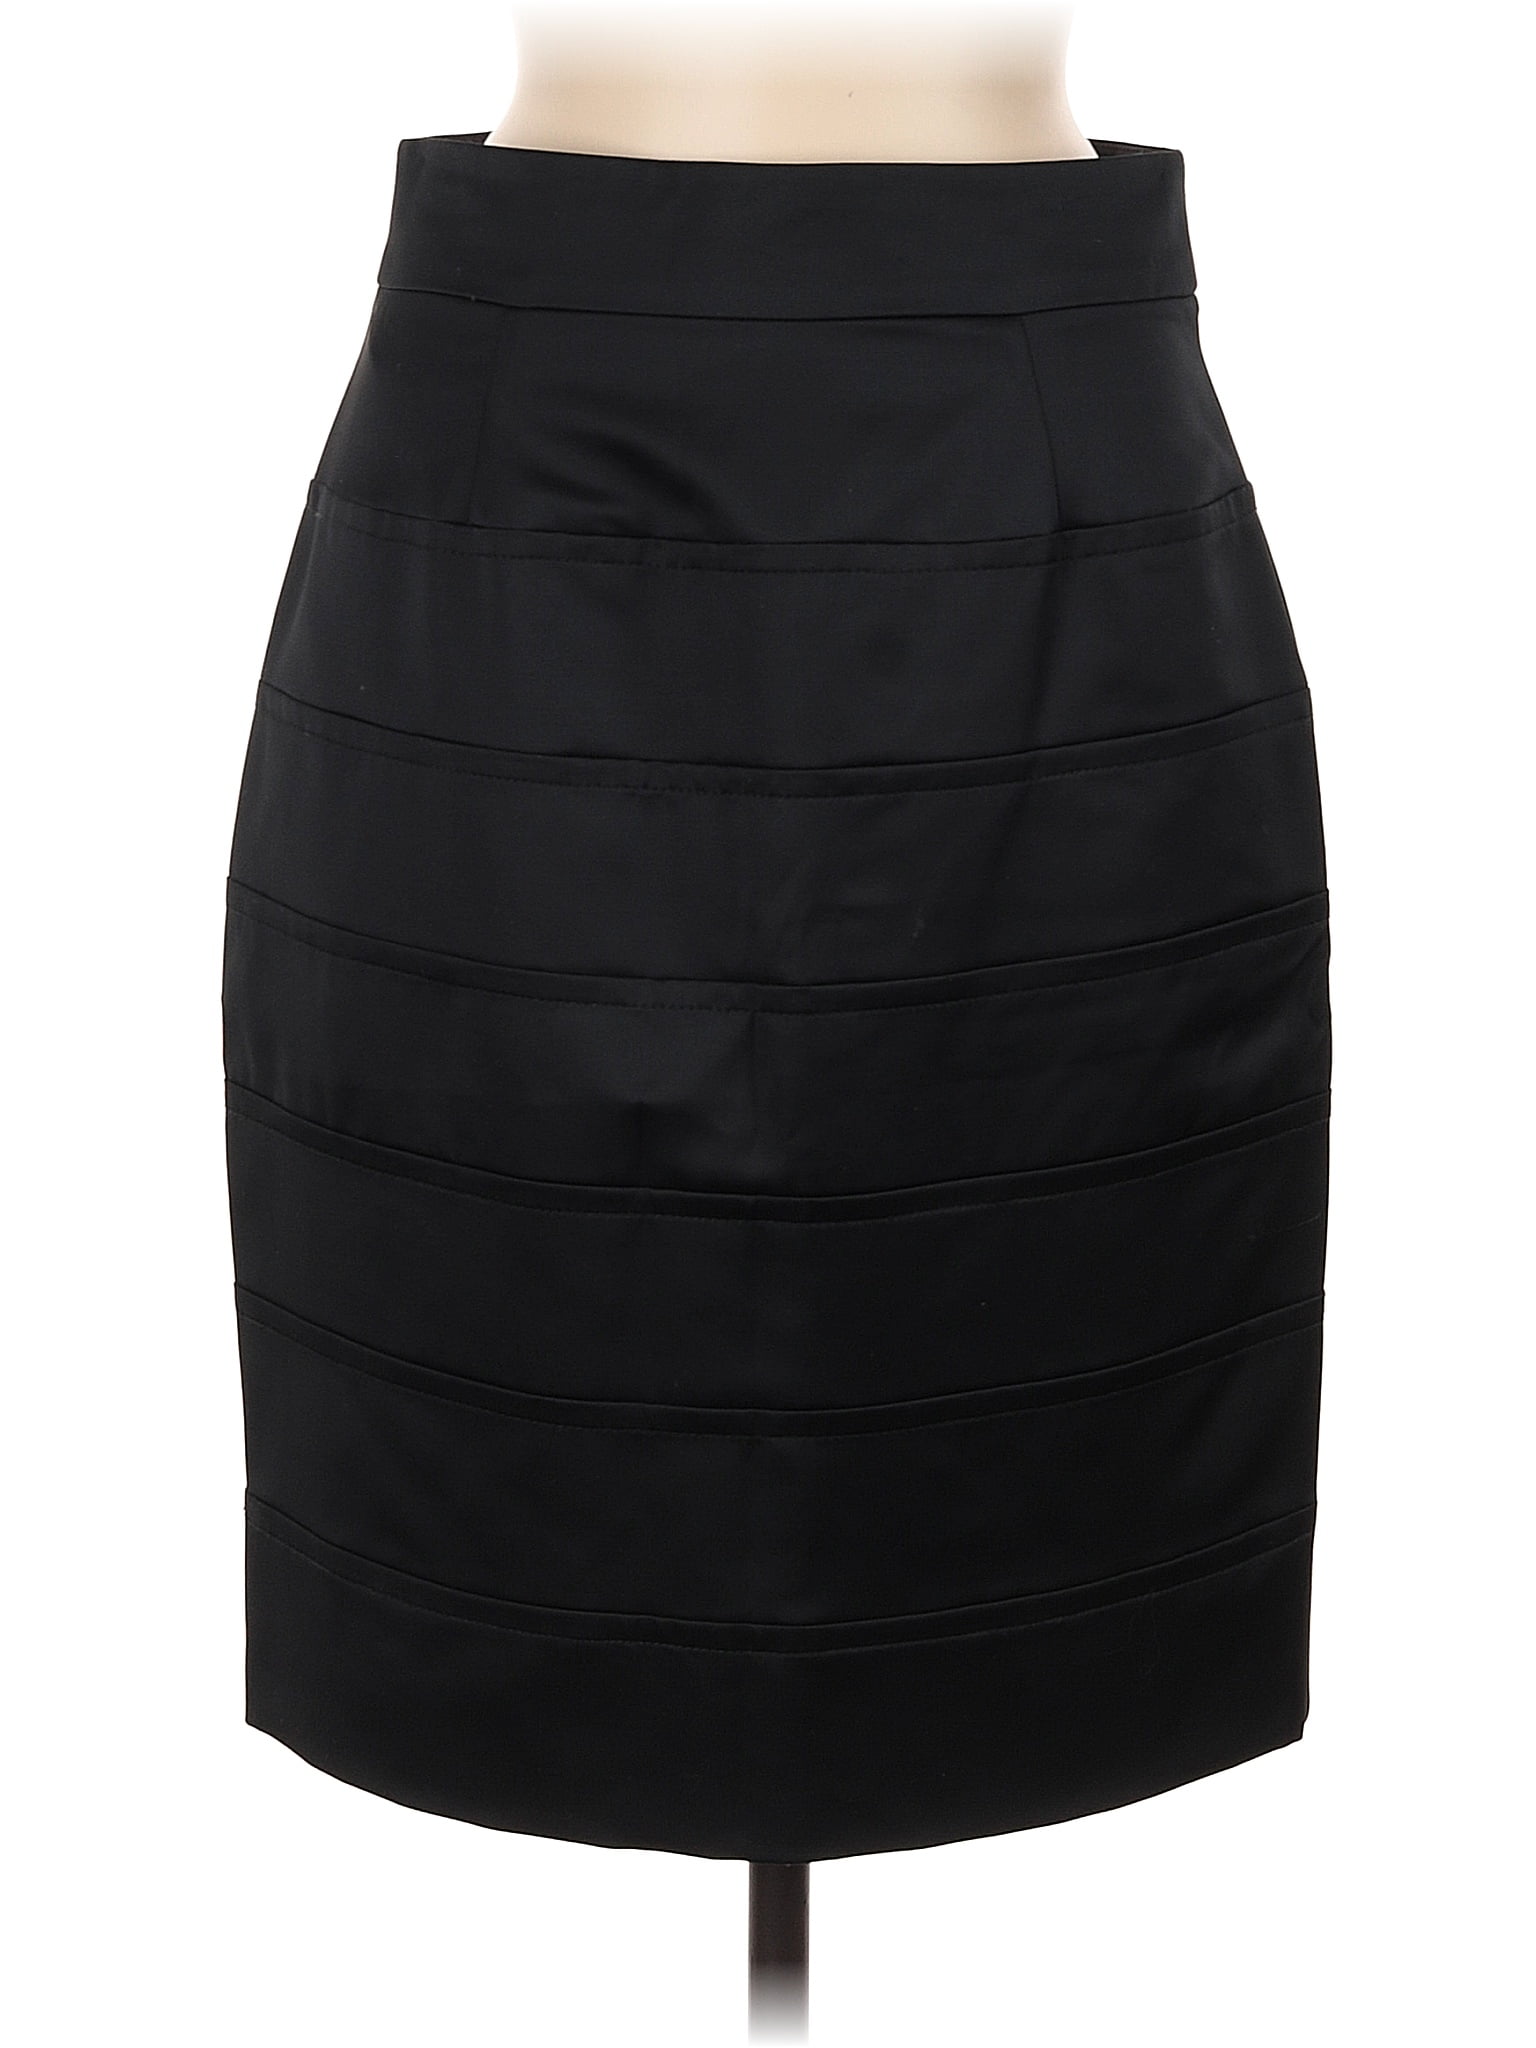 Trina Turk Solid Black Casual Skirt Size 6 - 81% off